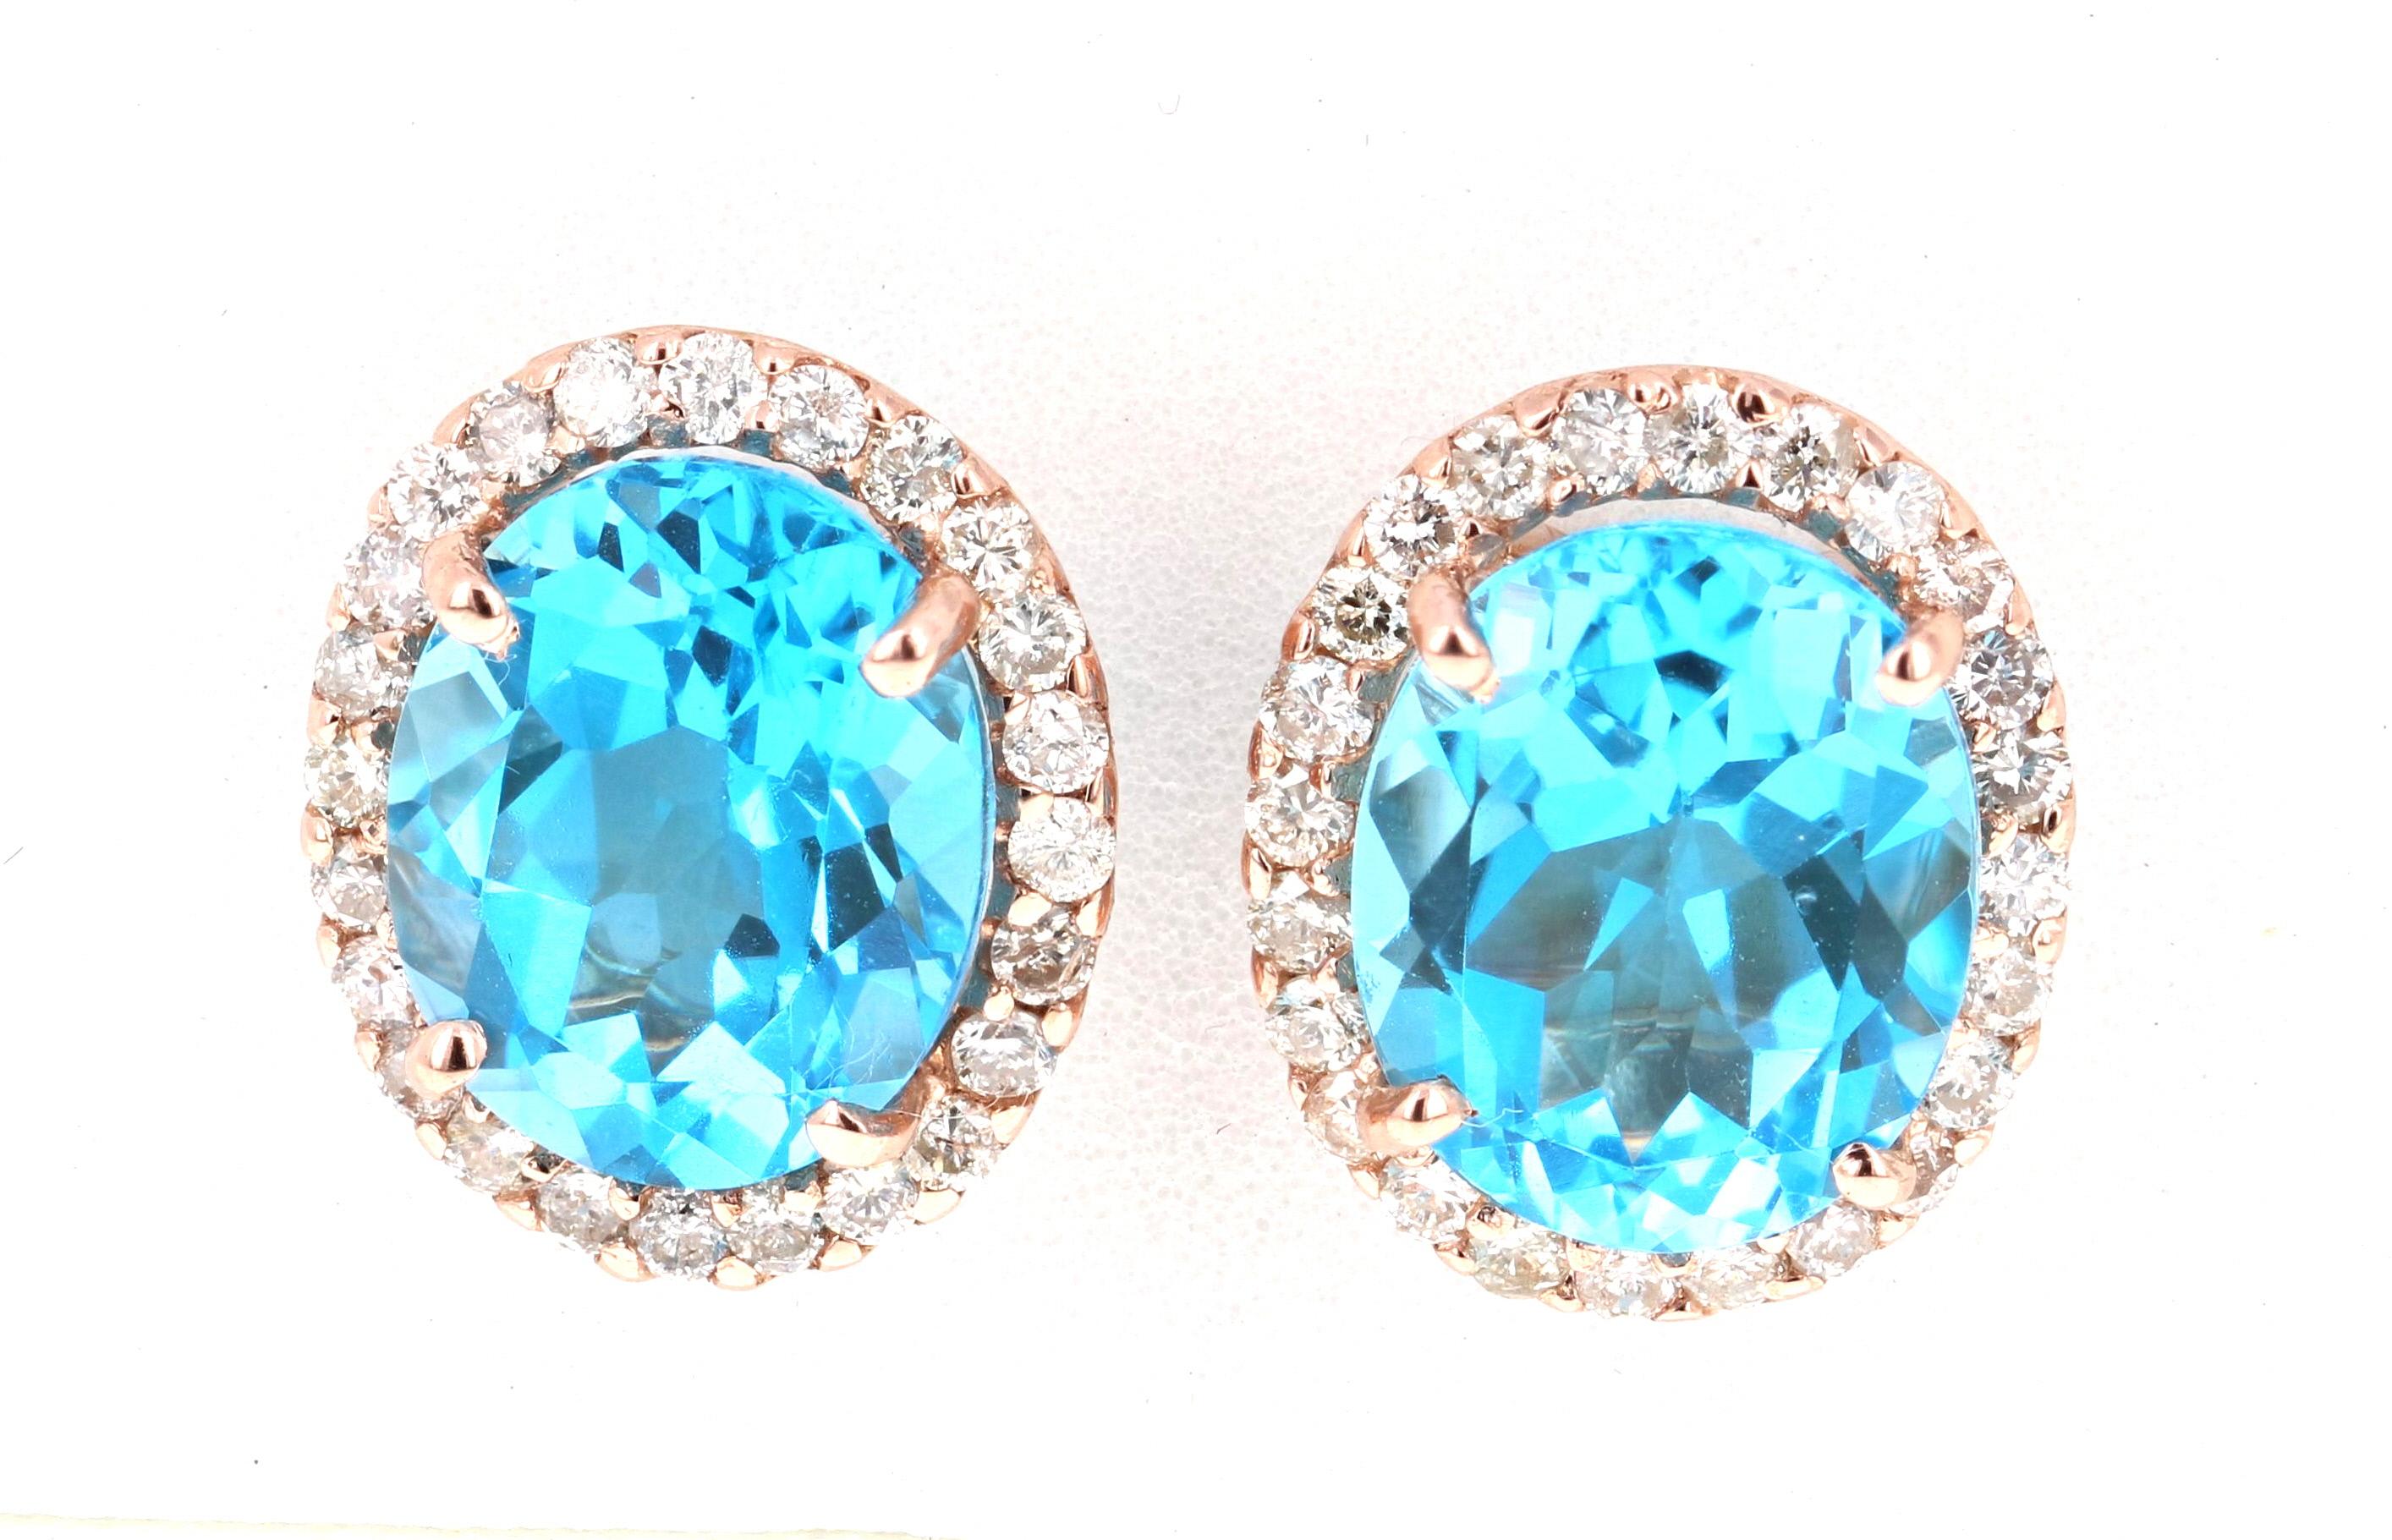 Super cute and classic earring studs made with pretty hues of Blue Topaz and diamonds.   
9.61 Carat Blue Topaz and Diamond 14 Karat Rose Gold Stud Earrings!

There are 2 Oval Cut Blue Topaz in the Earrings that weigh 8.81 Carats and they are